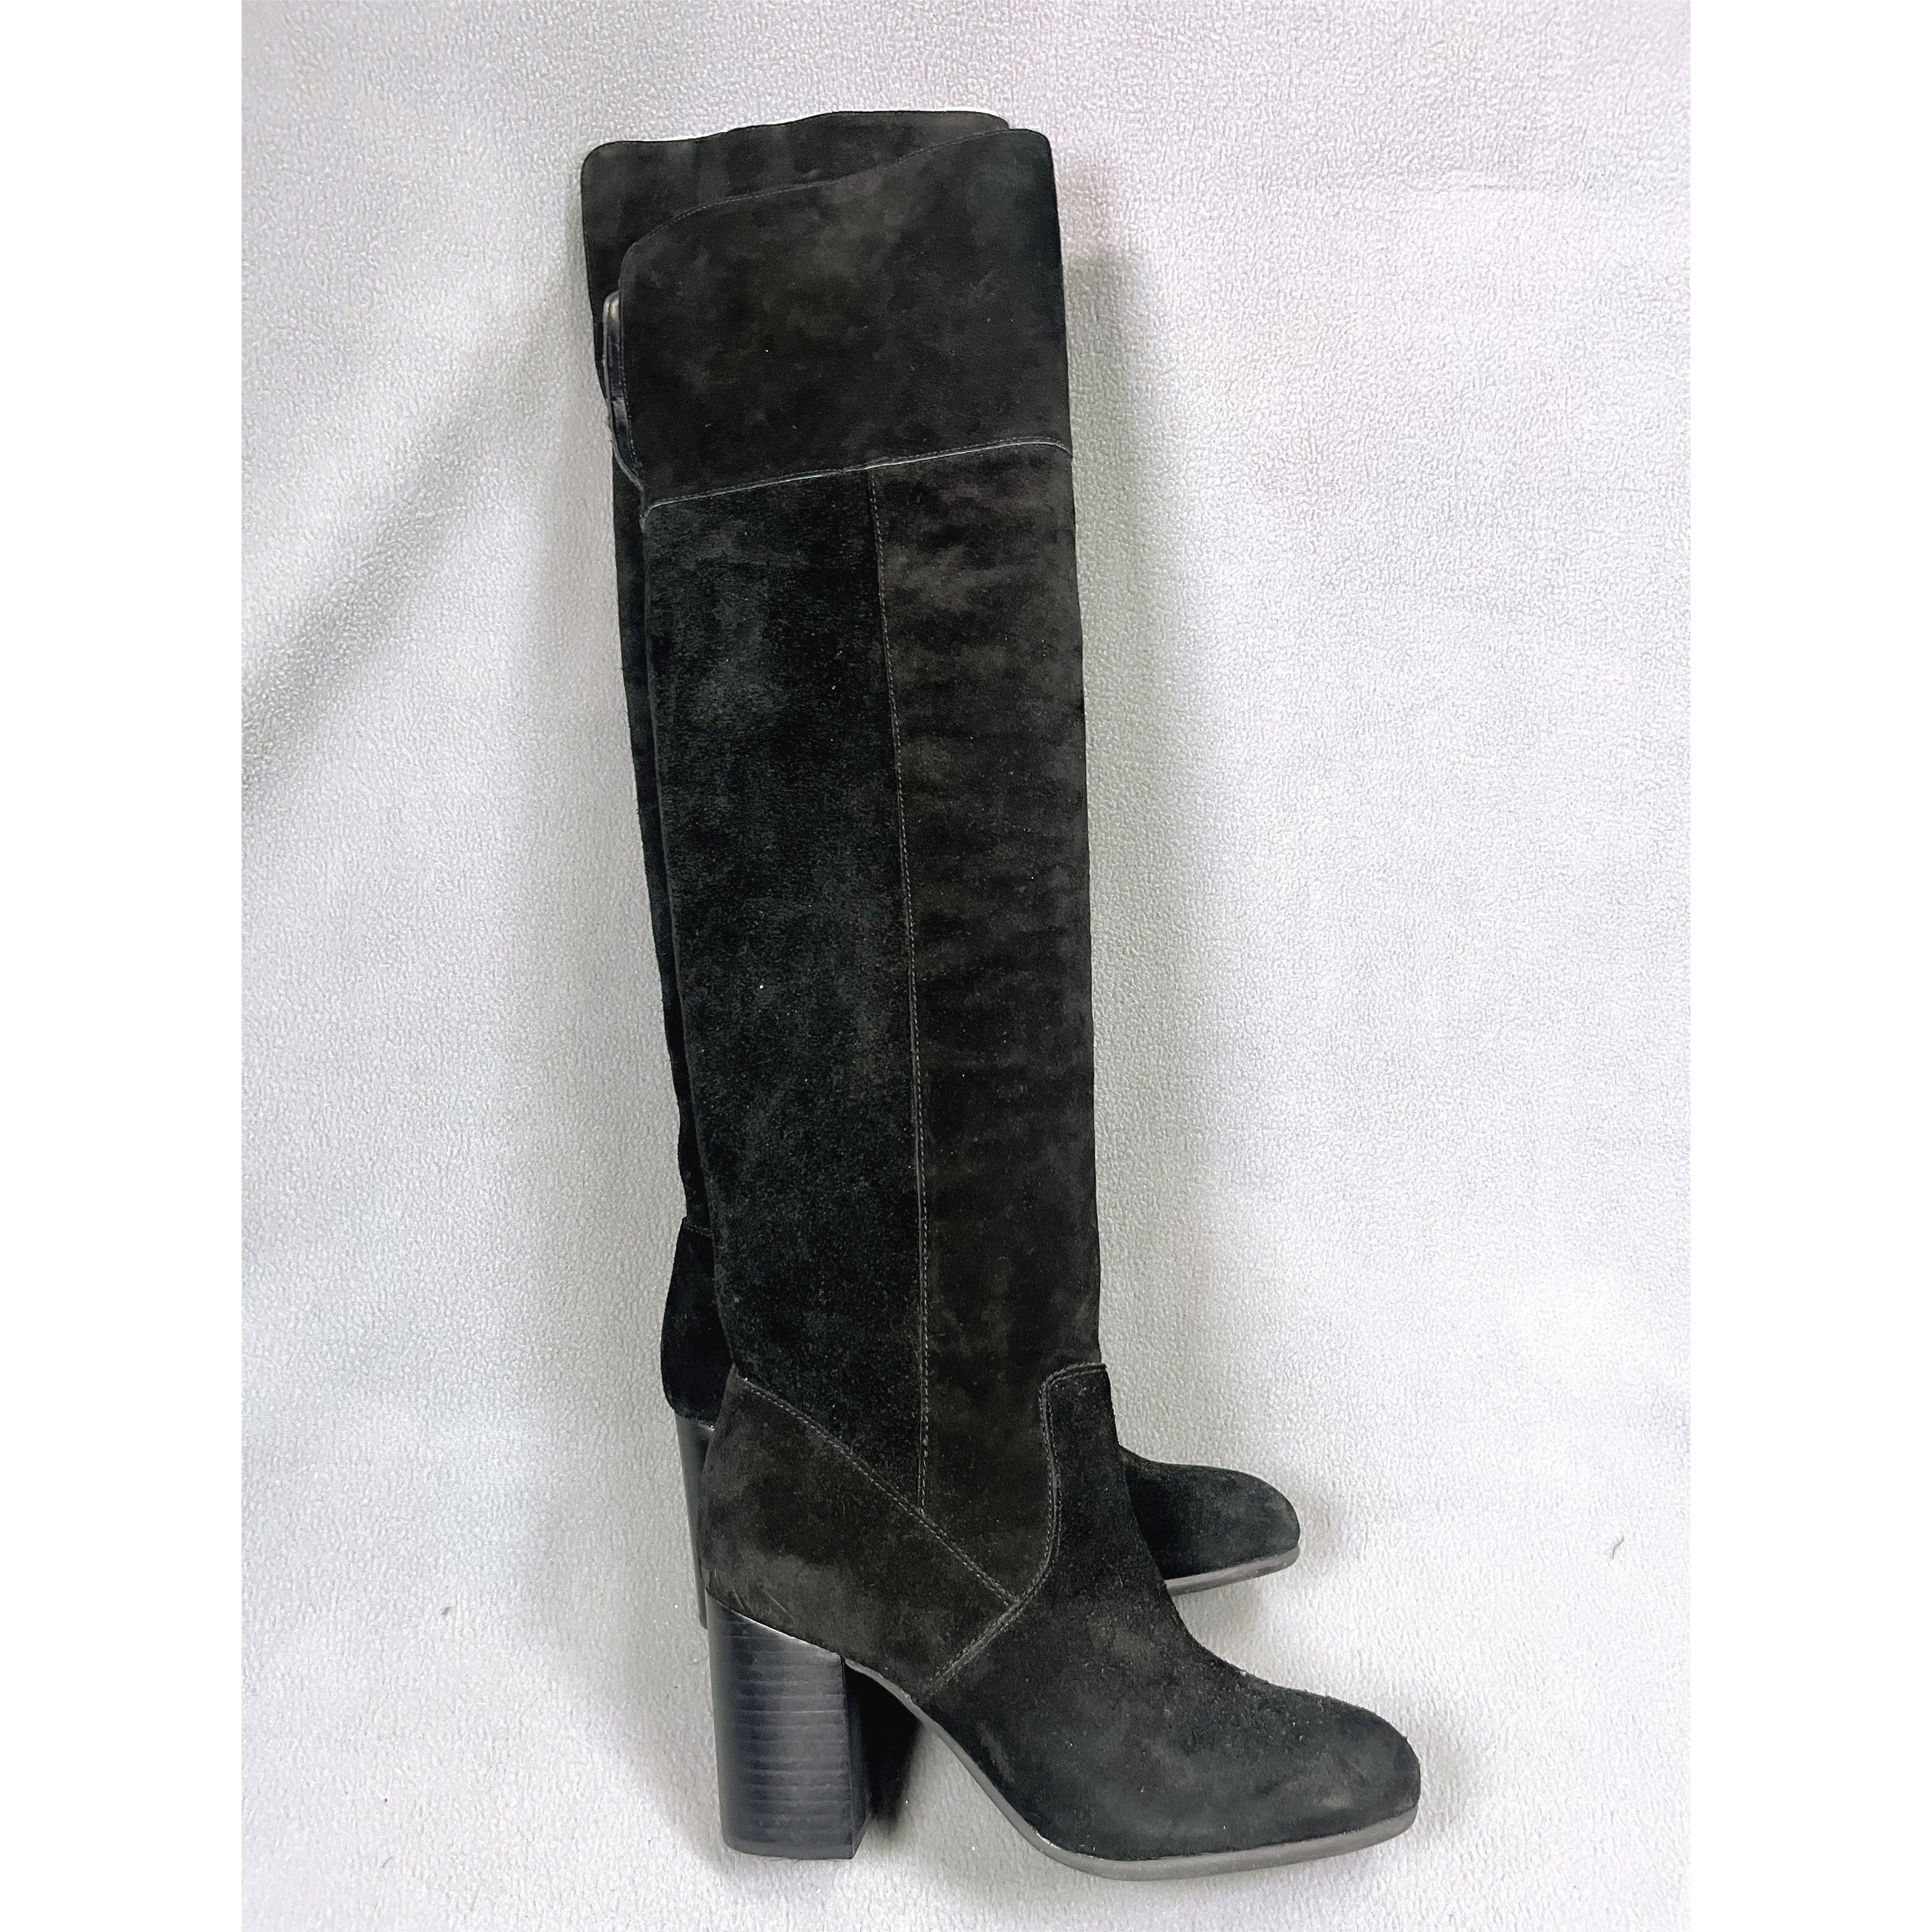 Jessica Simpson black suede over-the-knee boots, size 6.5, BRAND NEW!